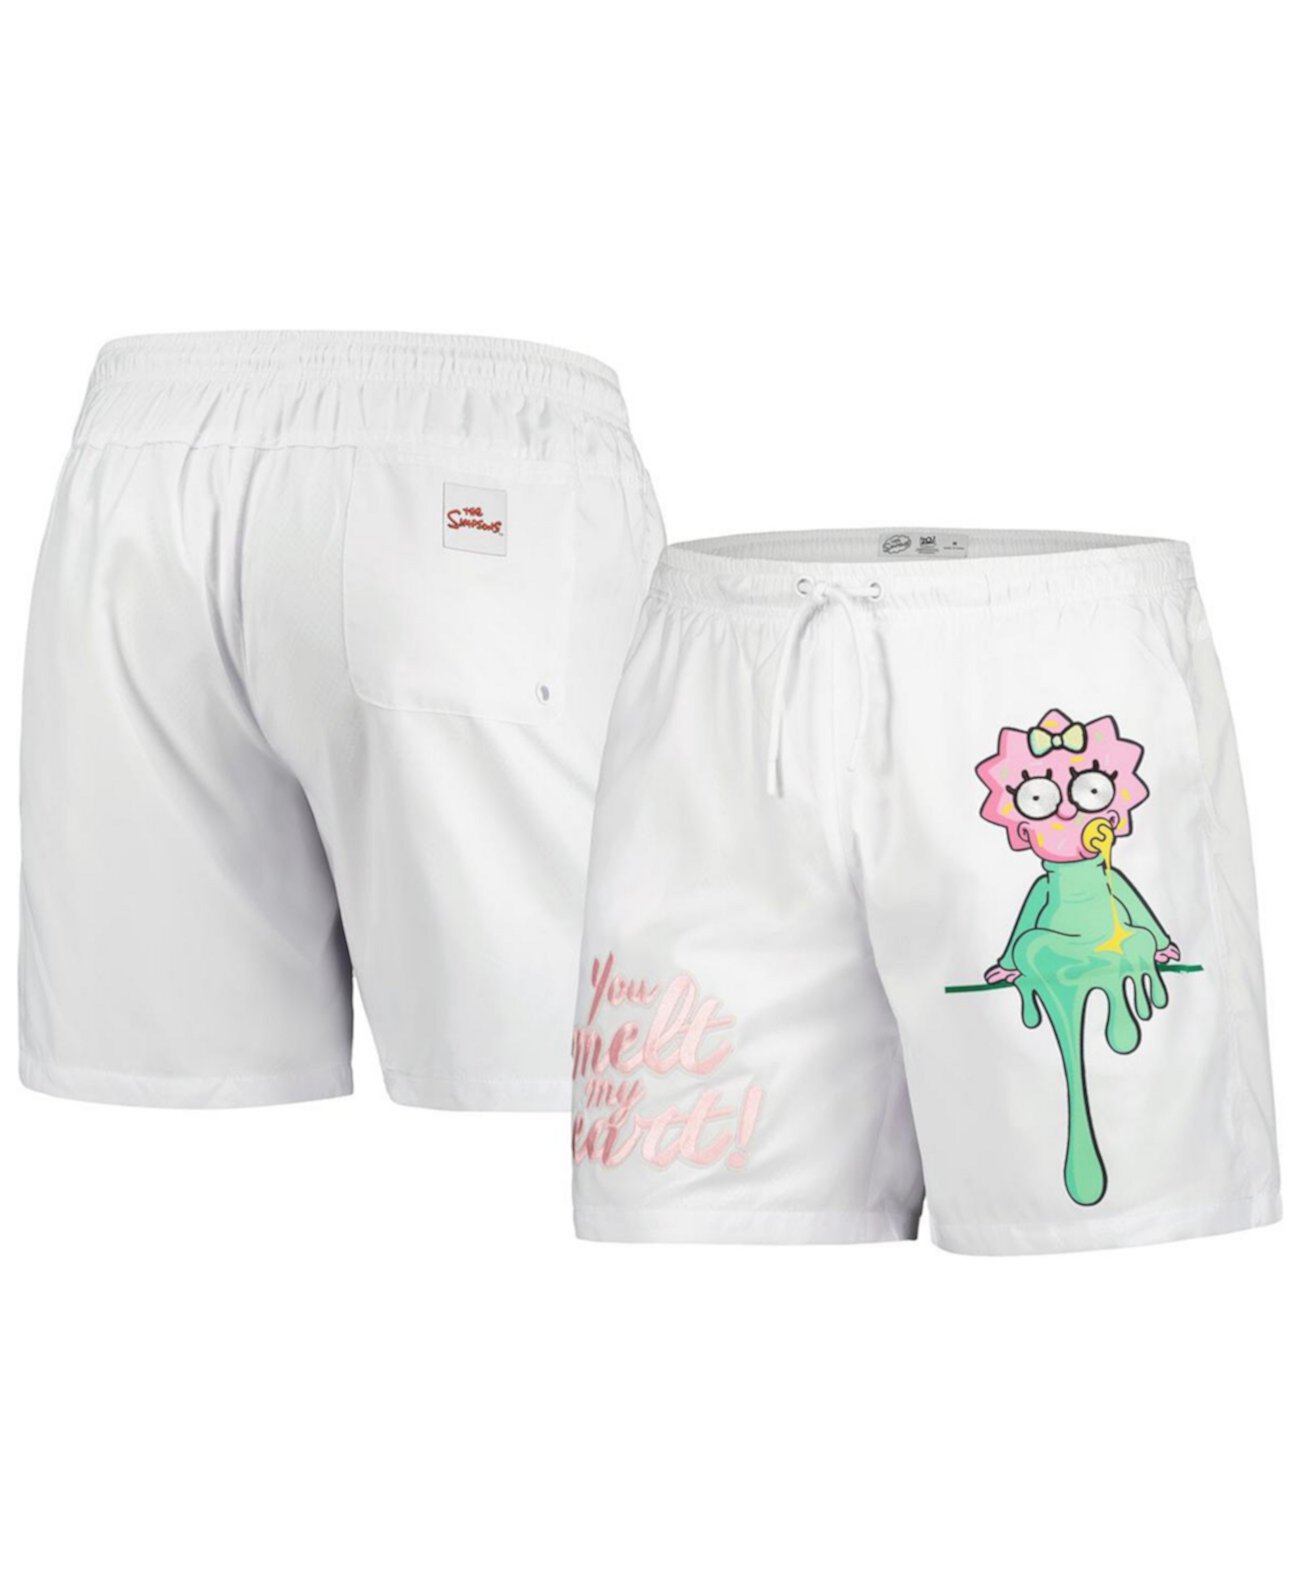 Men's White The Simpsons Shorts Freeze Max